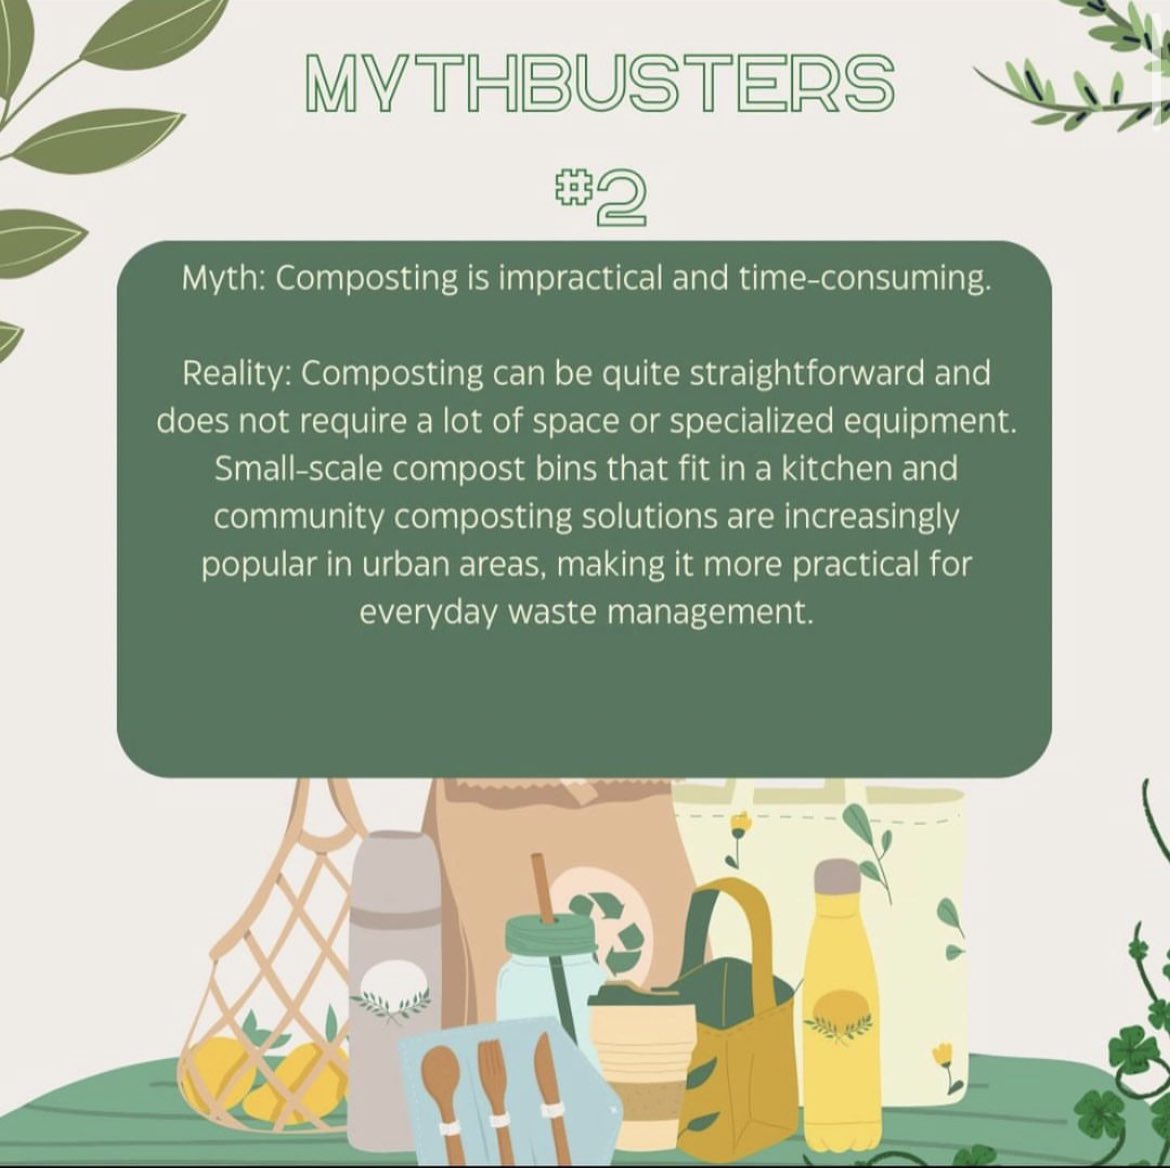 Myth: Composting is impractical and time-consuming. Reality: It's easier than you think!
With small-scale kitchen compost bins and community solutions, composting is practical and eco-friendly.
Let's turn waste into wealth! • ♻️#Composting Myths #SustainableLiving #WasteToWealth